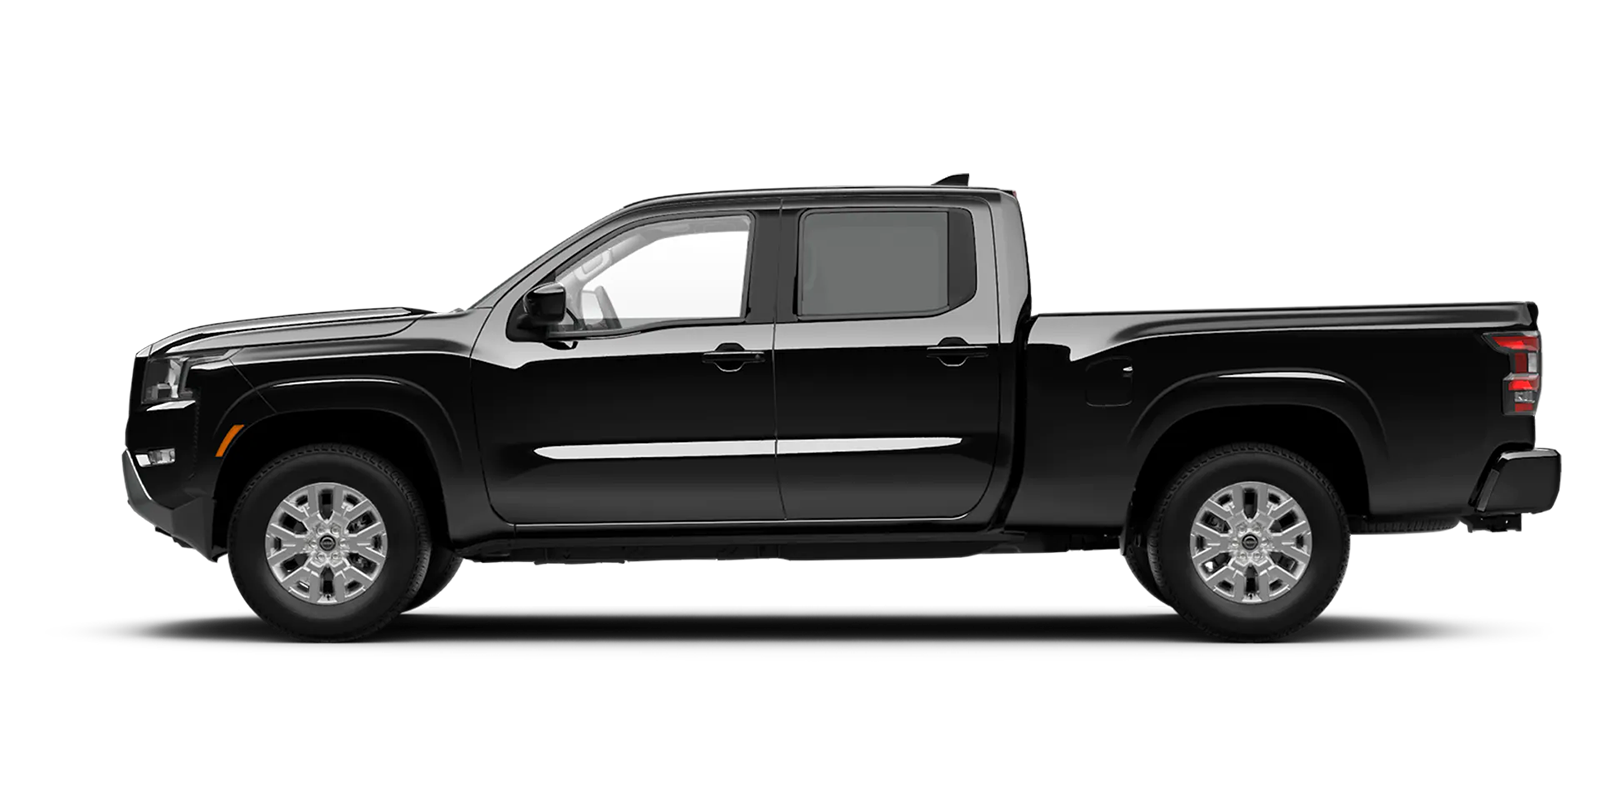 2022 Frontier Crew Cab Long Bed SV 4x4 in Super Black | Auffenberg Nissan in Shiloh IL